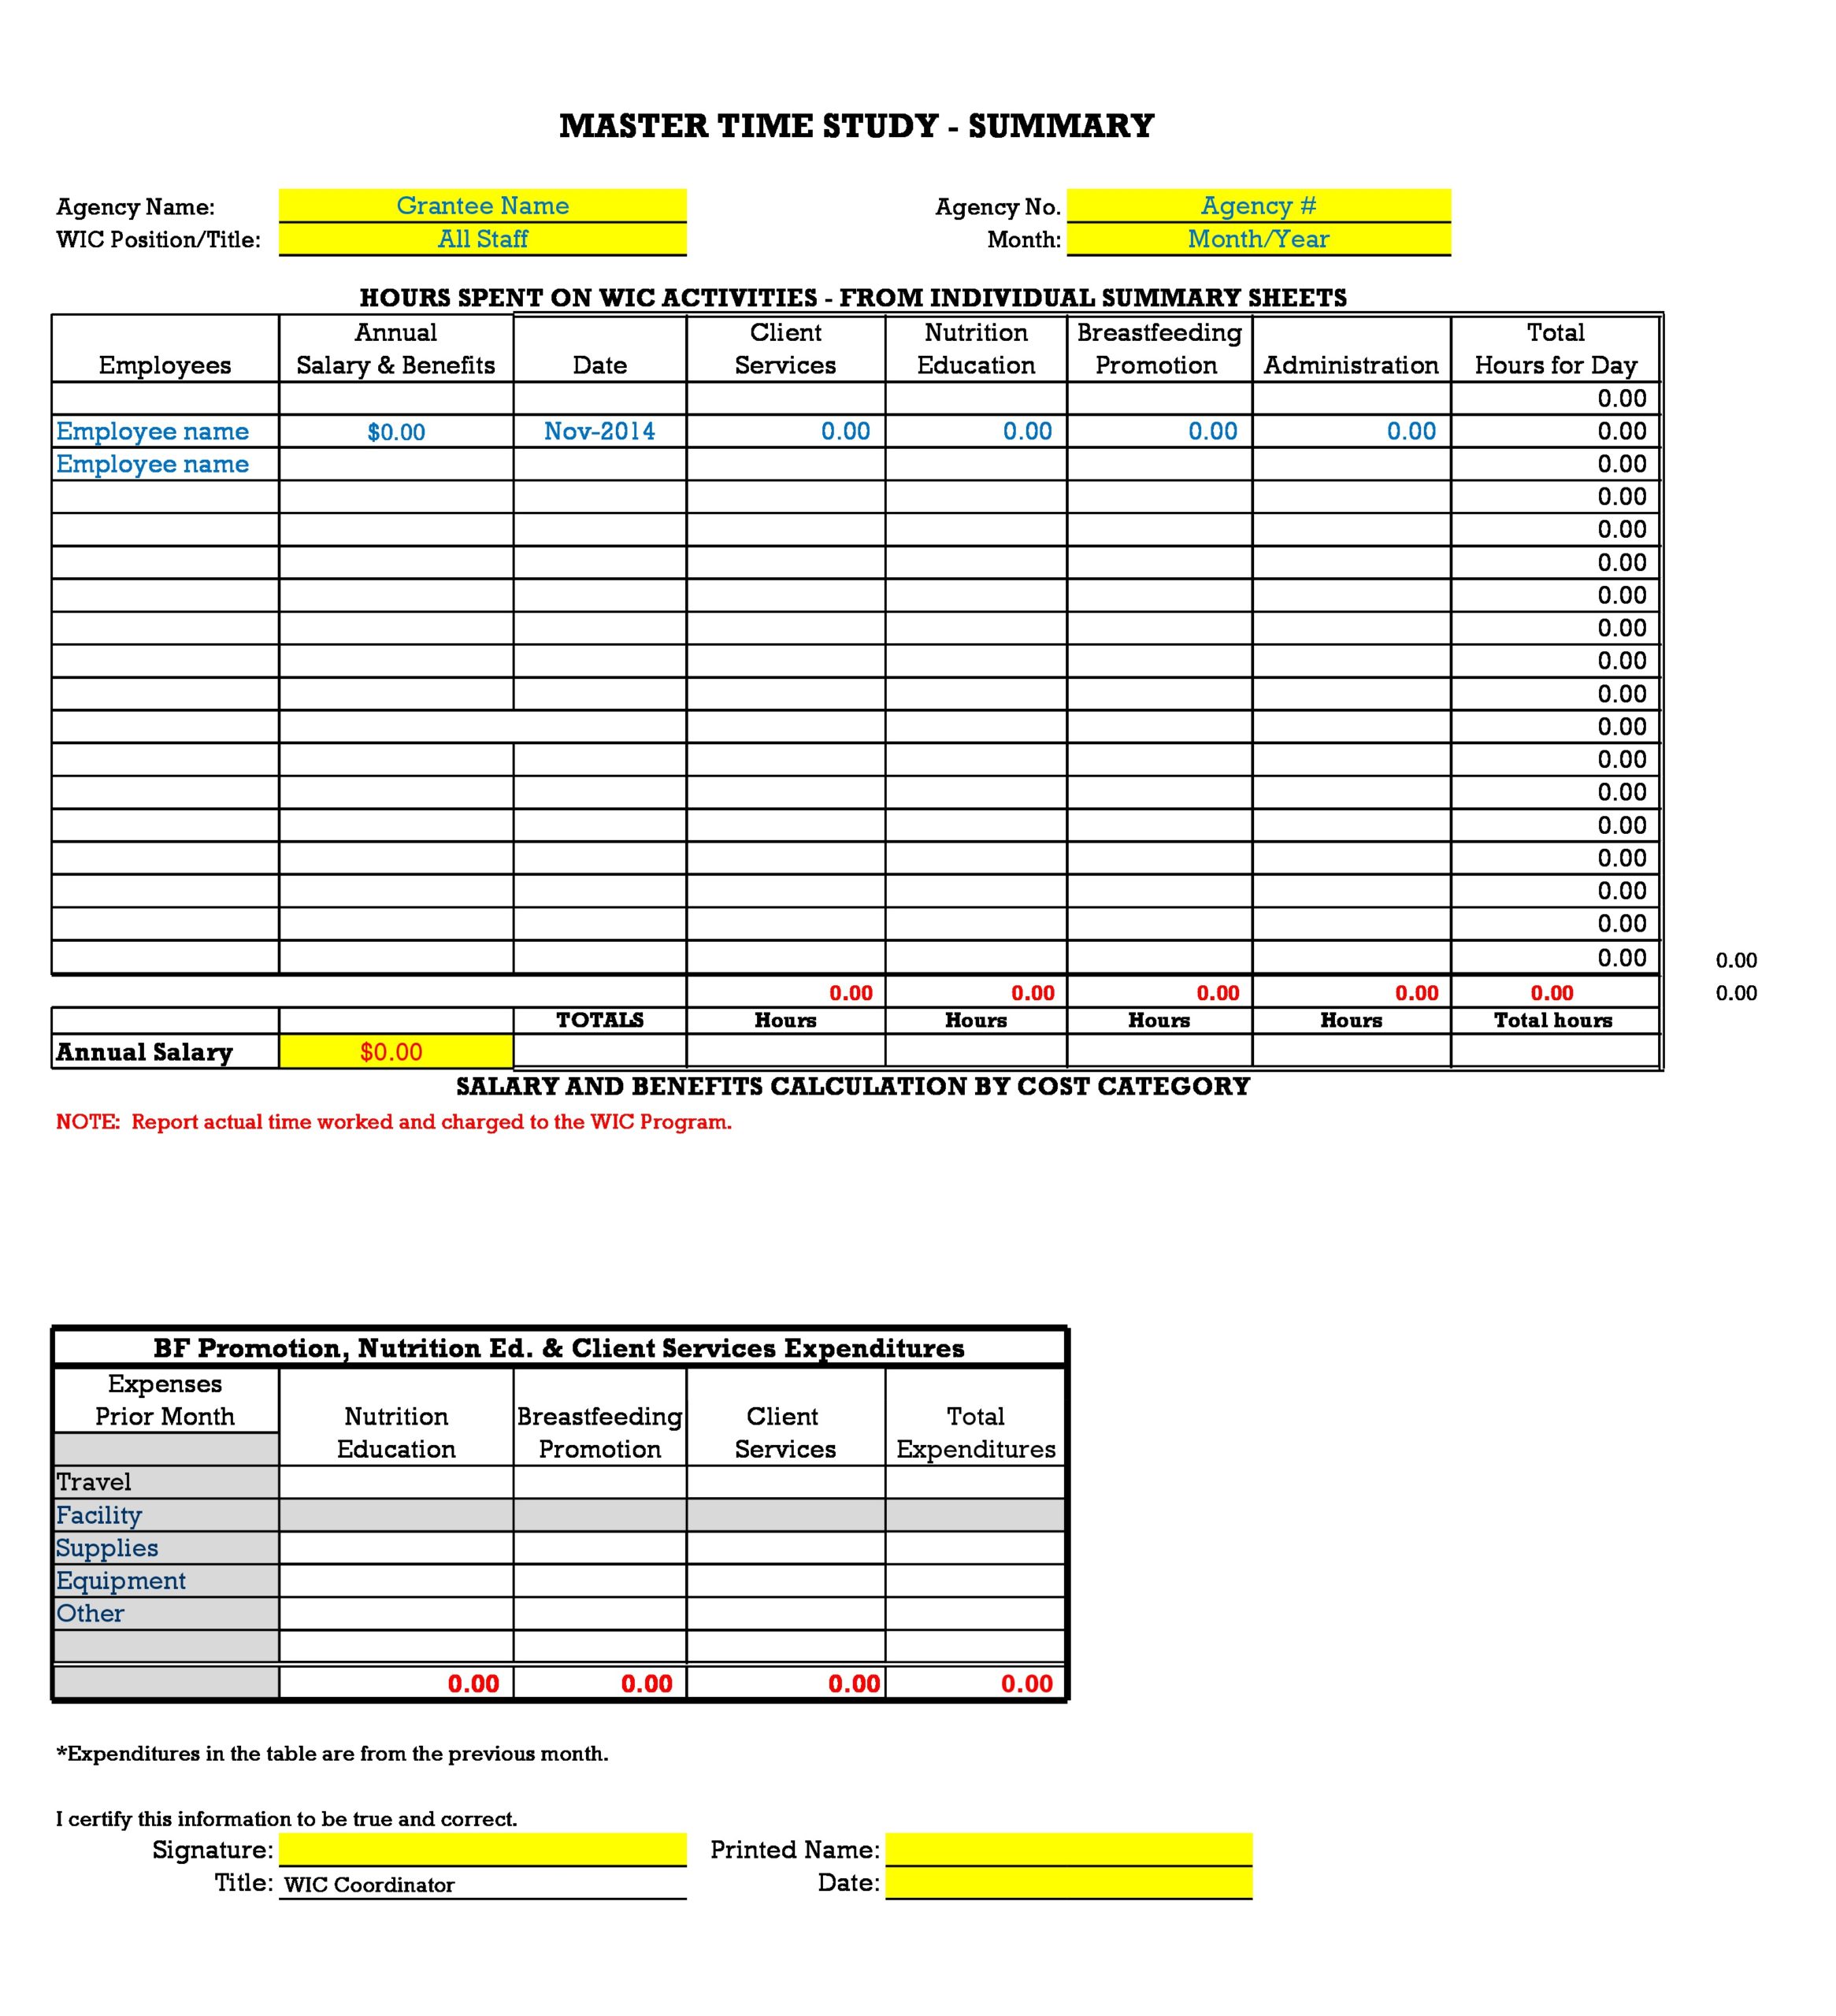 Process time study template excel free download free download drivers for windows 7 ultimate 64 bit